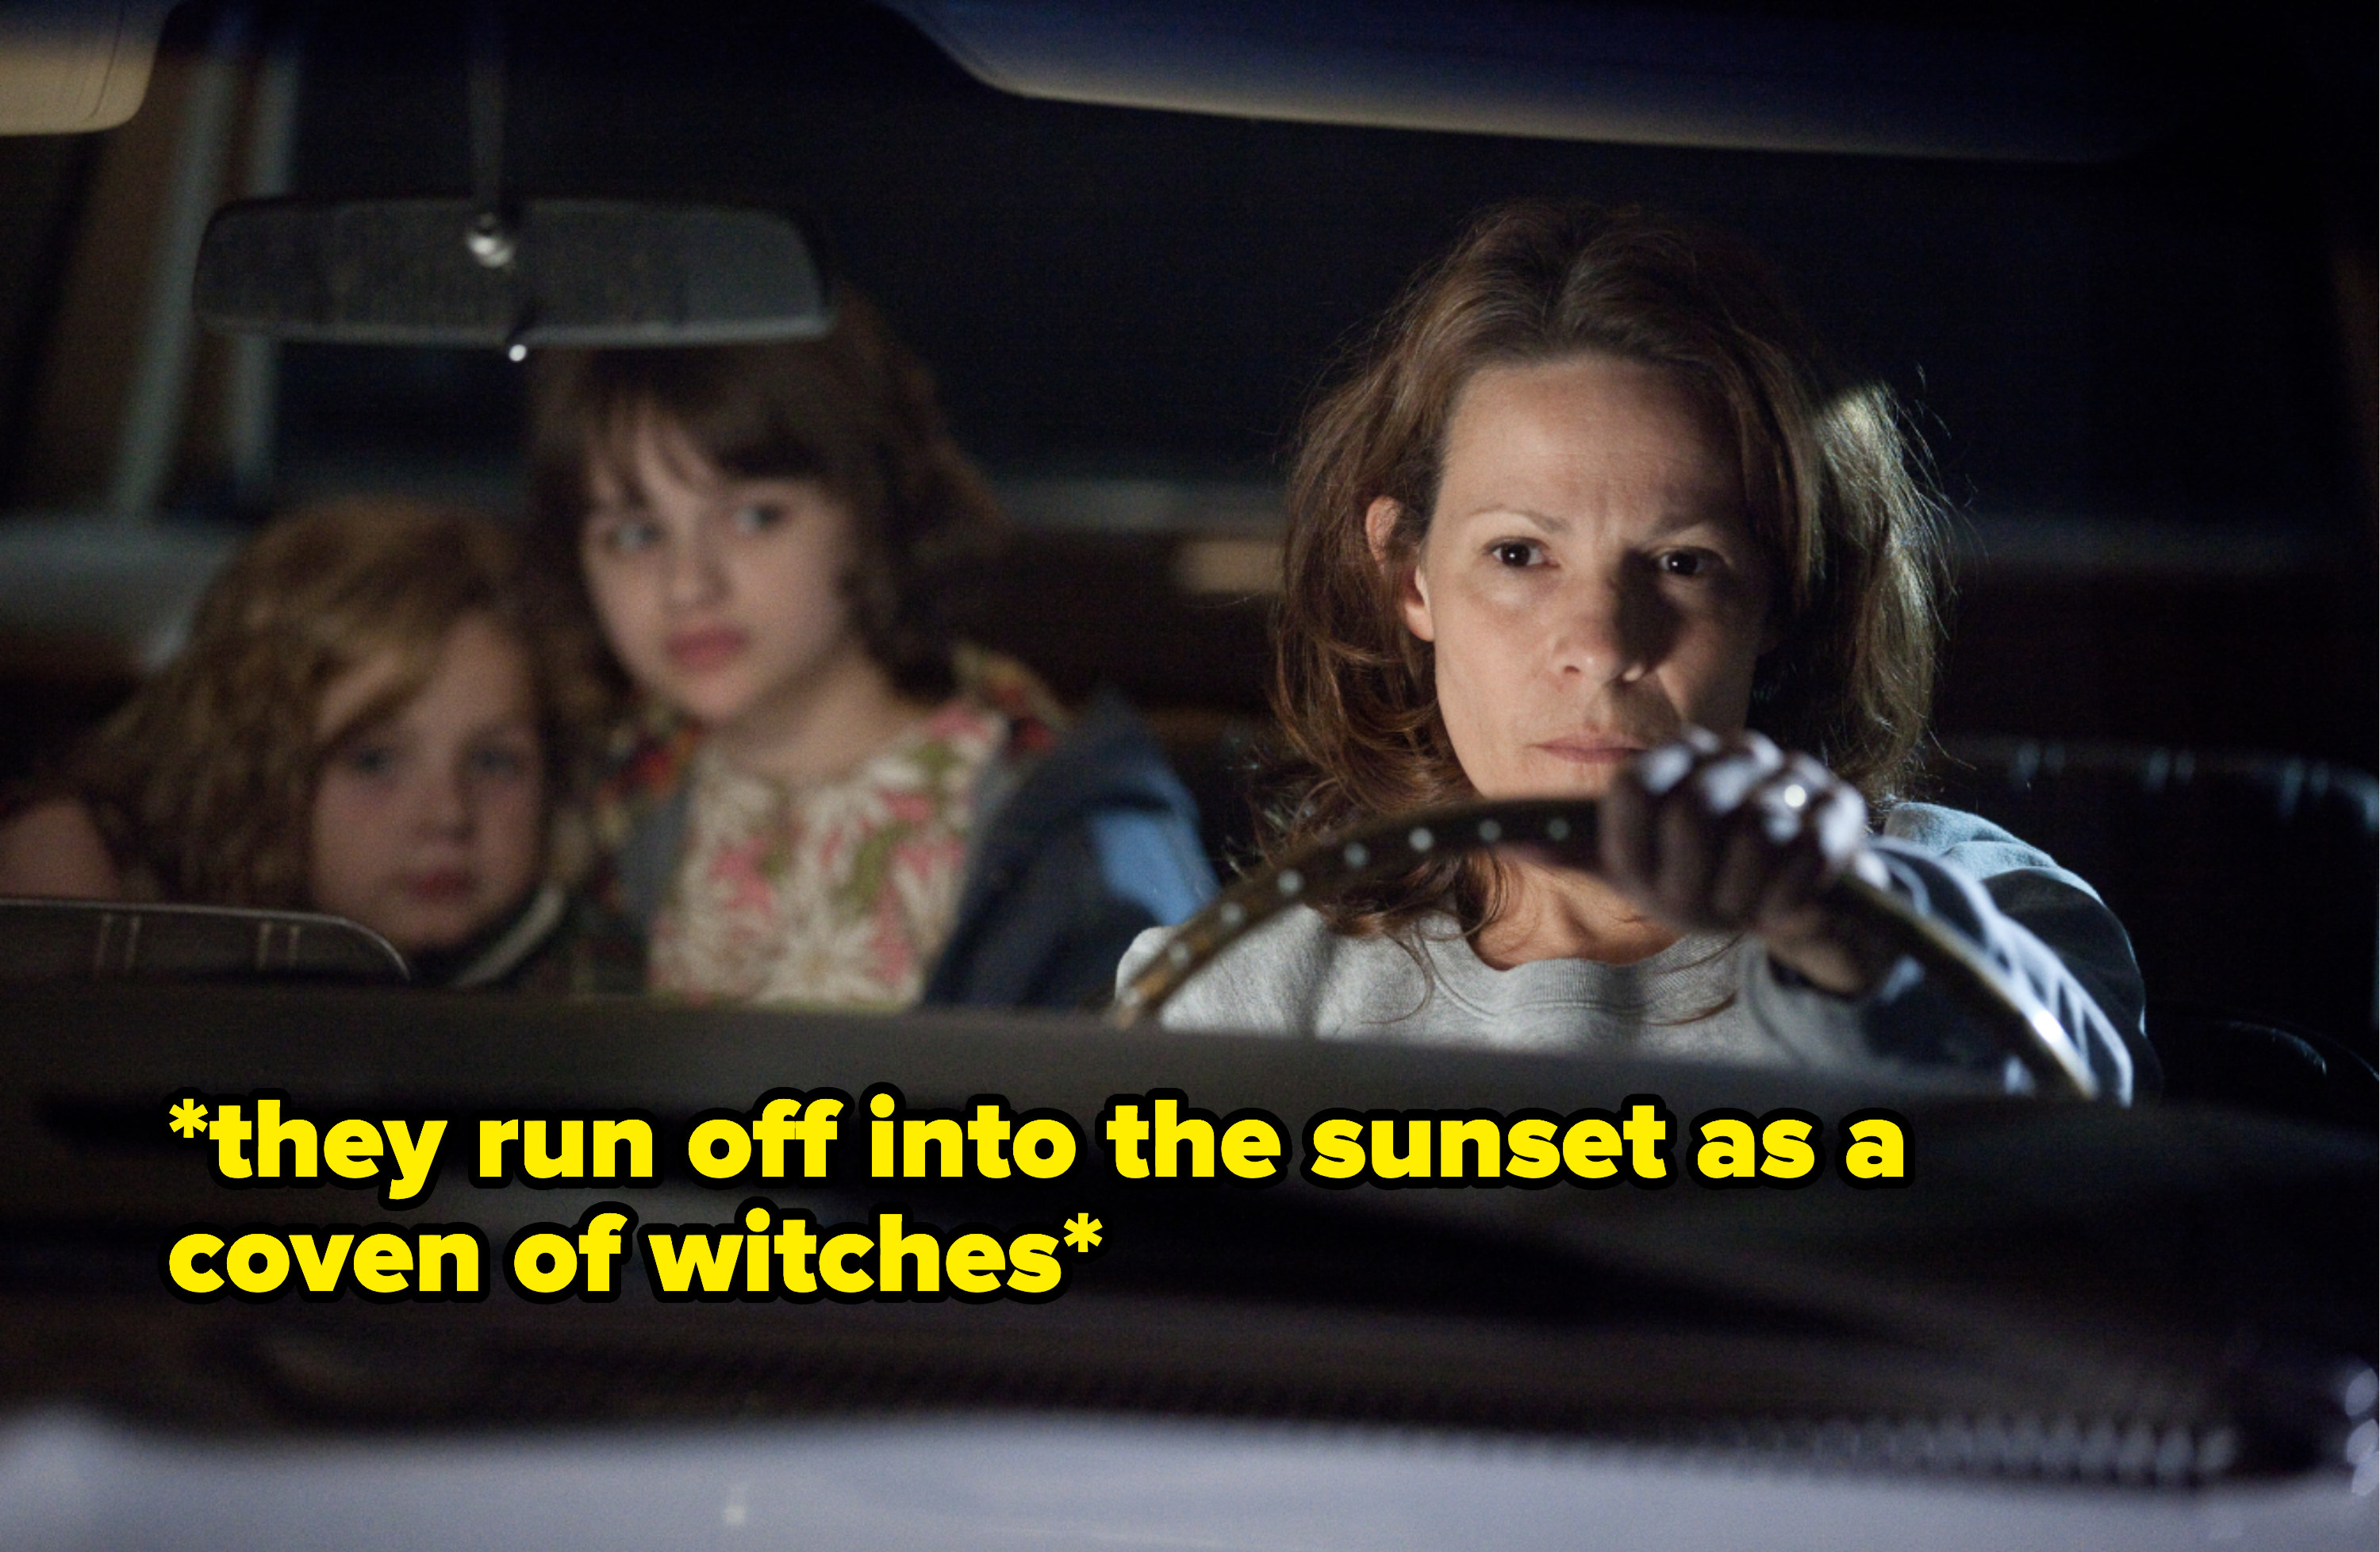 the mom in the conjuring driving with her two daughters in the backseat of the car